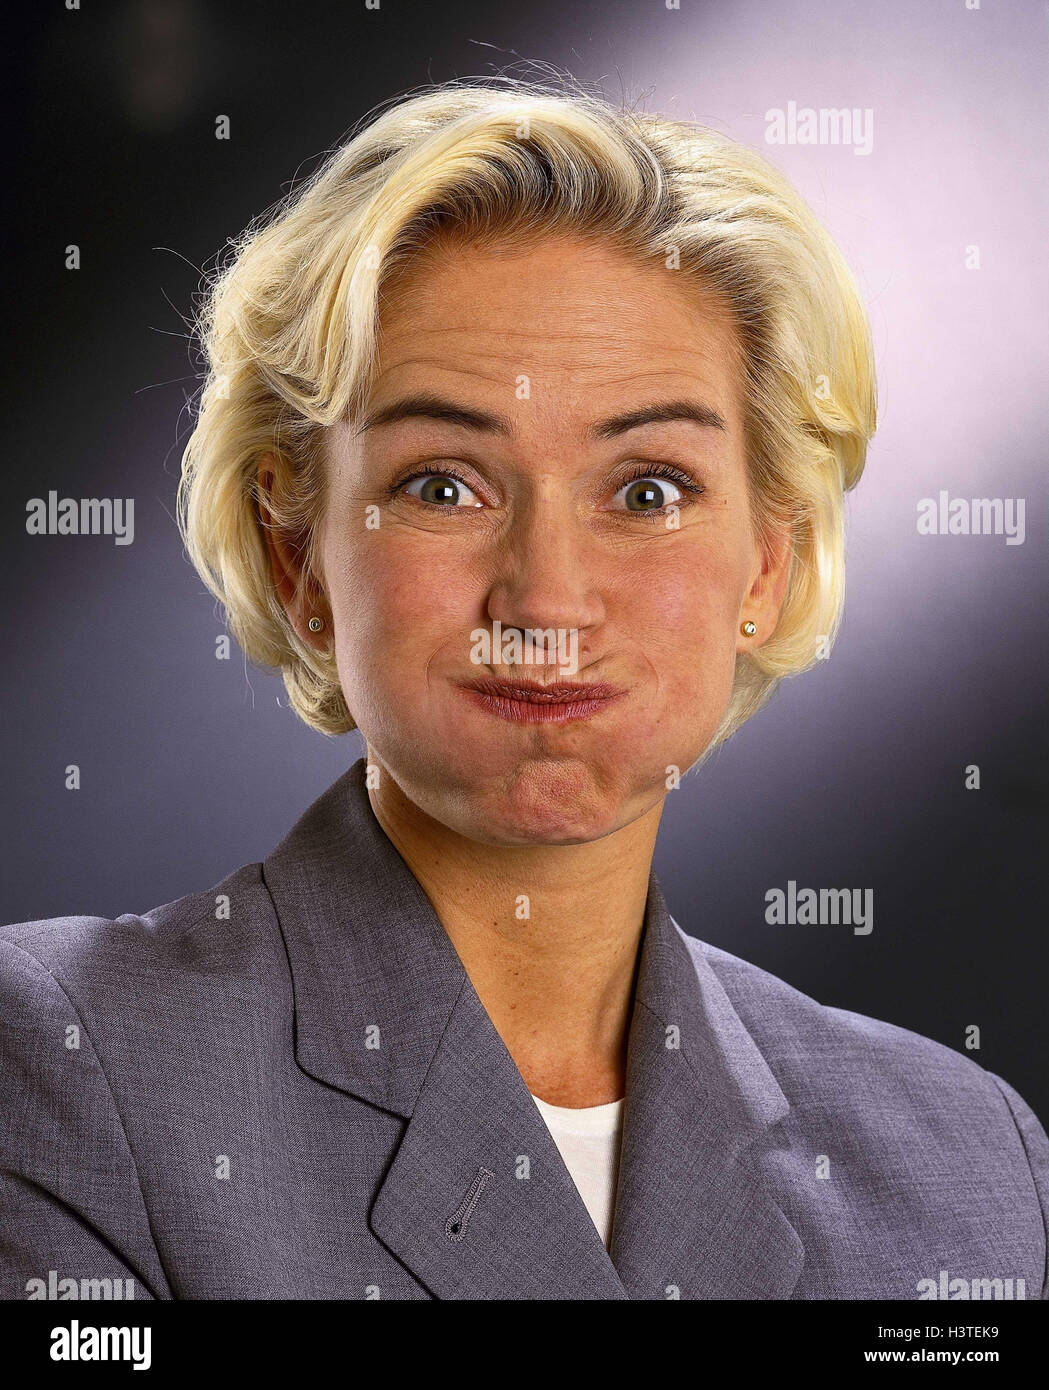 Woman, young, blond, facial play, chubby cheeks, portrait, women, studio, businesswoman, snort, finish laughing, mock, mockery, cut out, view, camera, air, stop, to aerial clues, Stock Photo